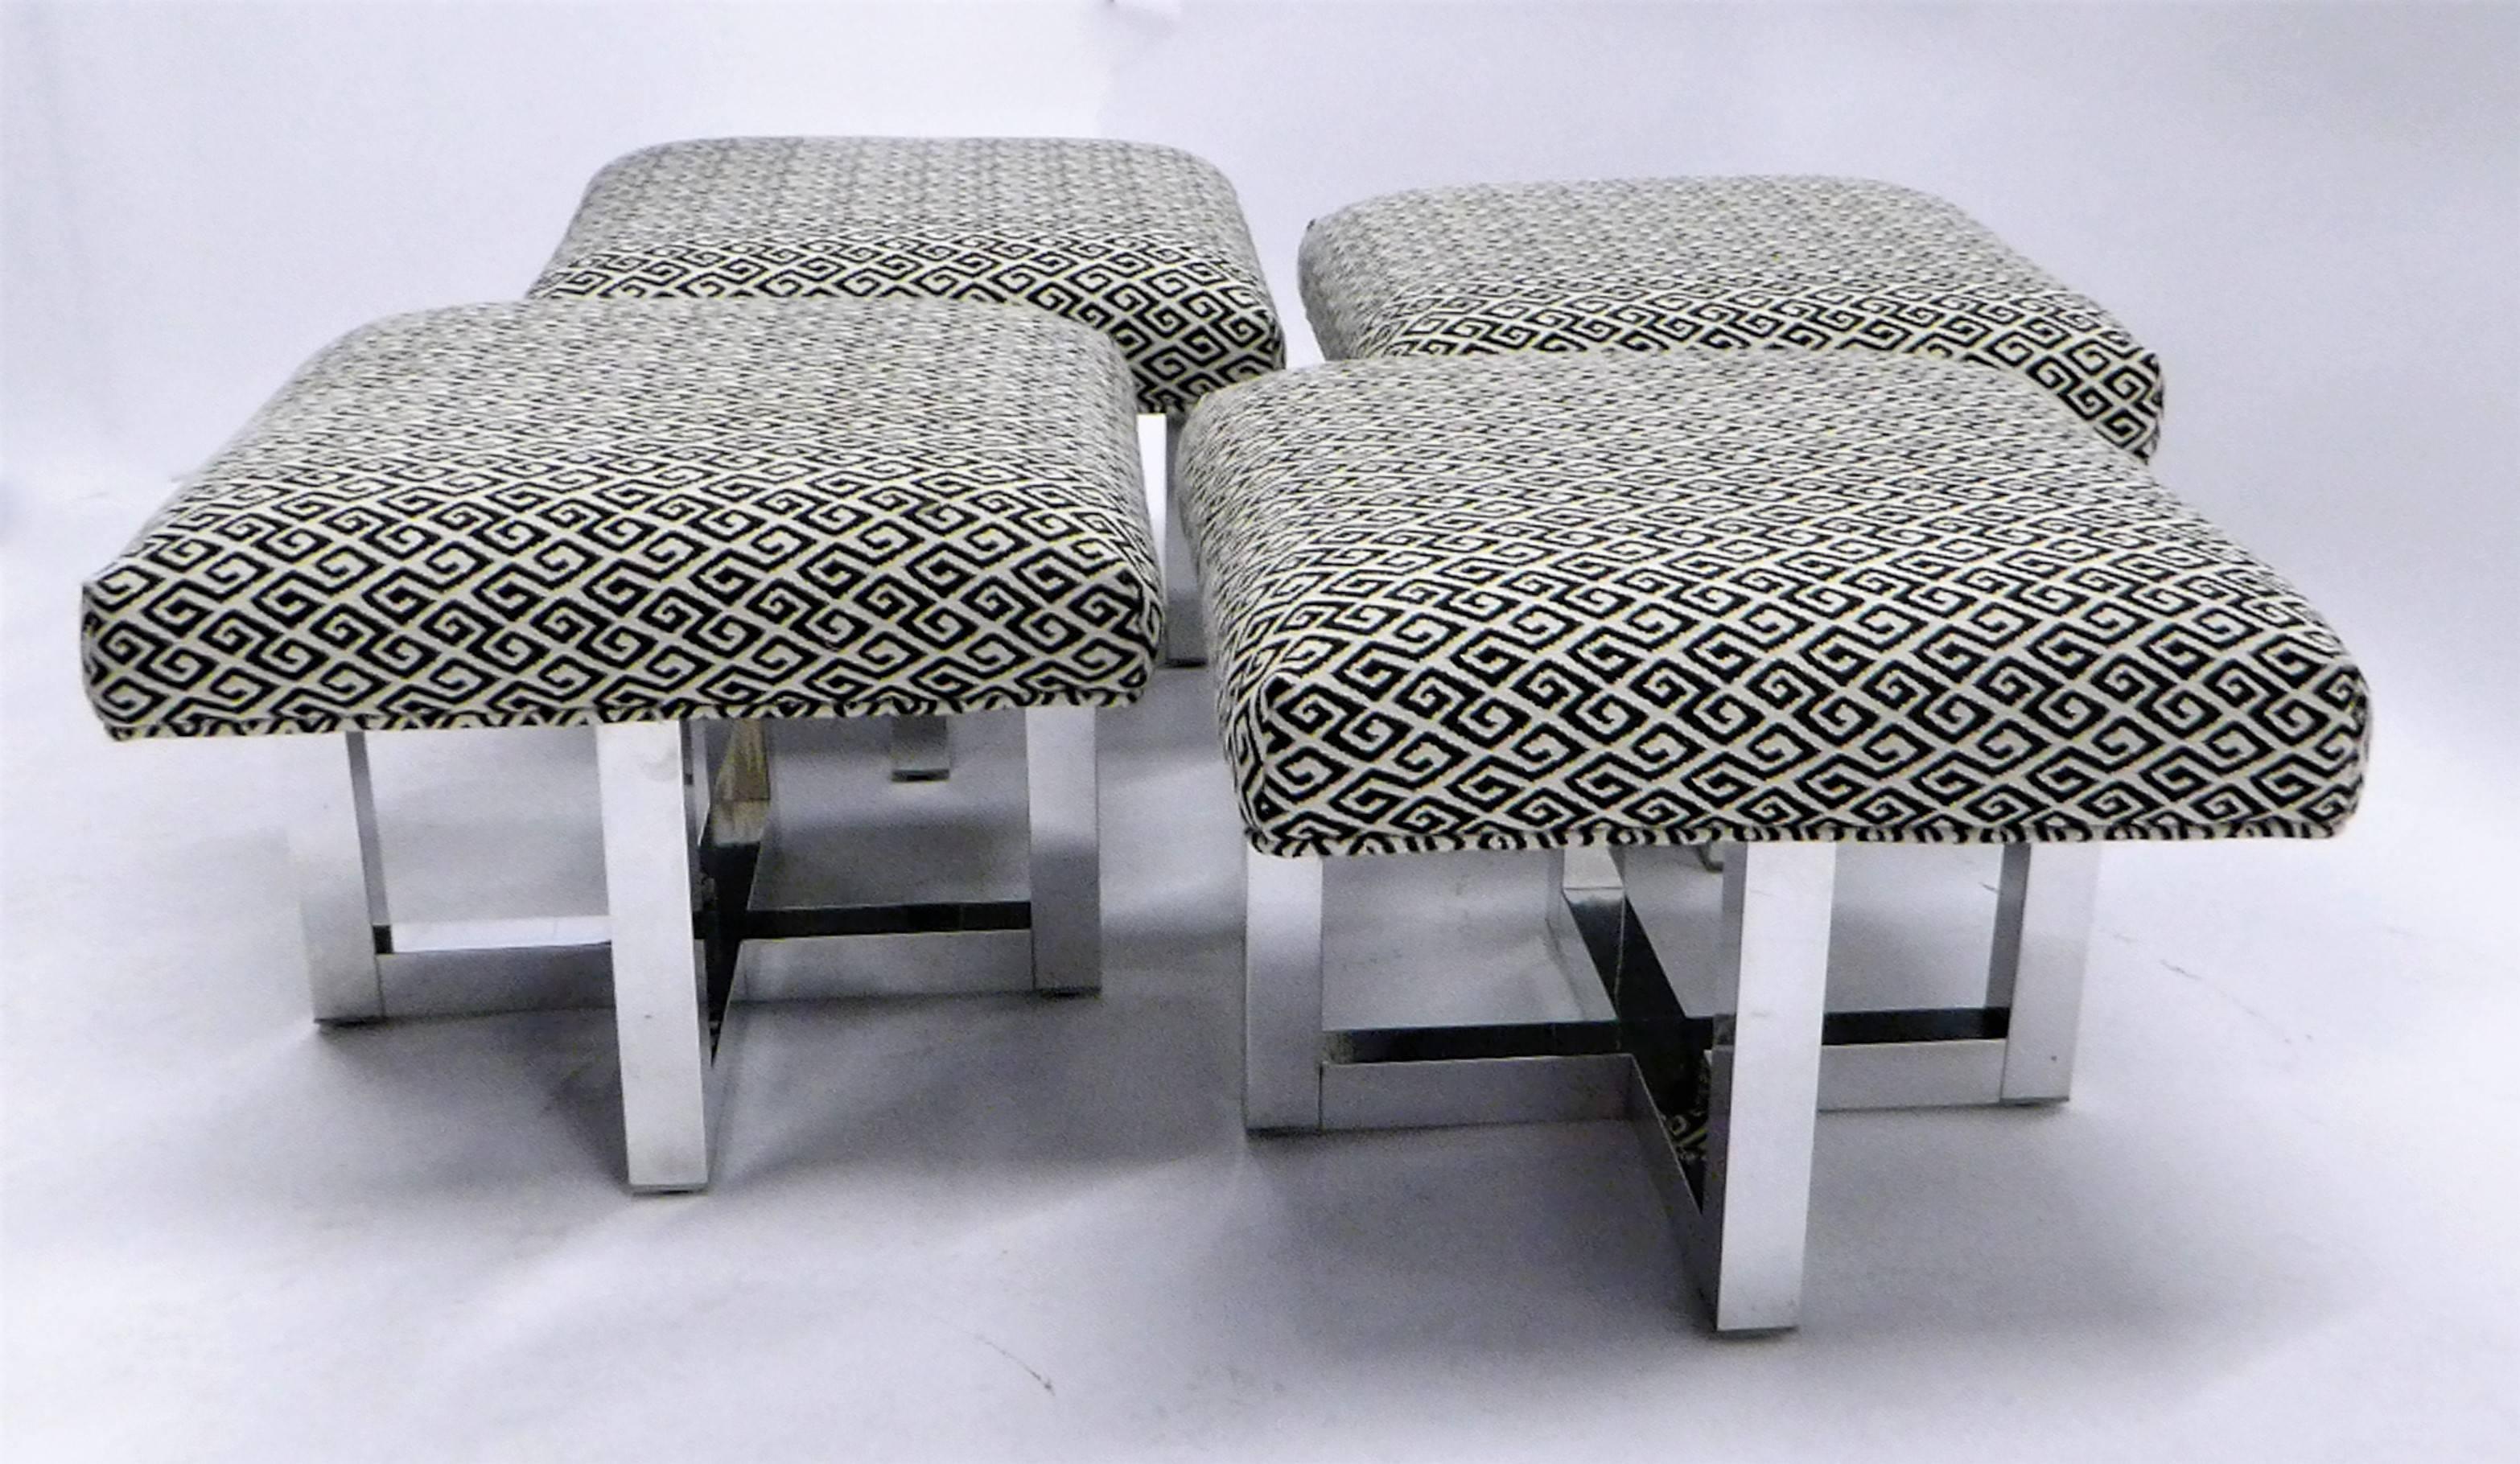 Mid-20th Century Milo Baughman Style Bench Stools Polished Aluminum Upholstered 2 pairs available